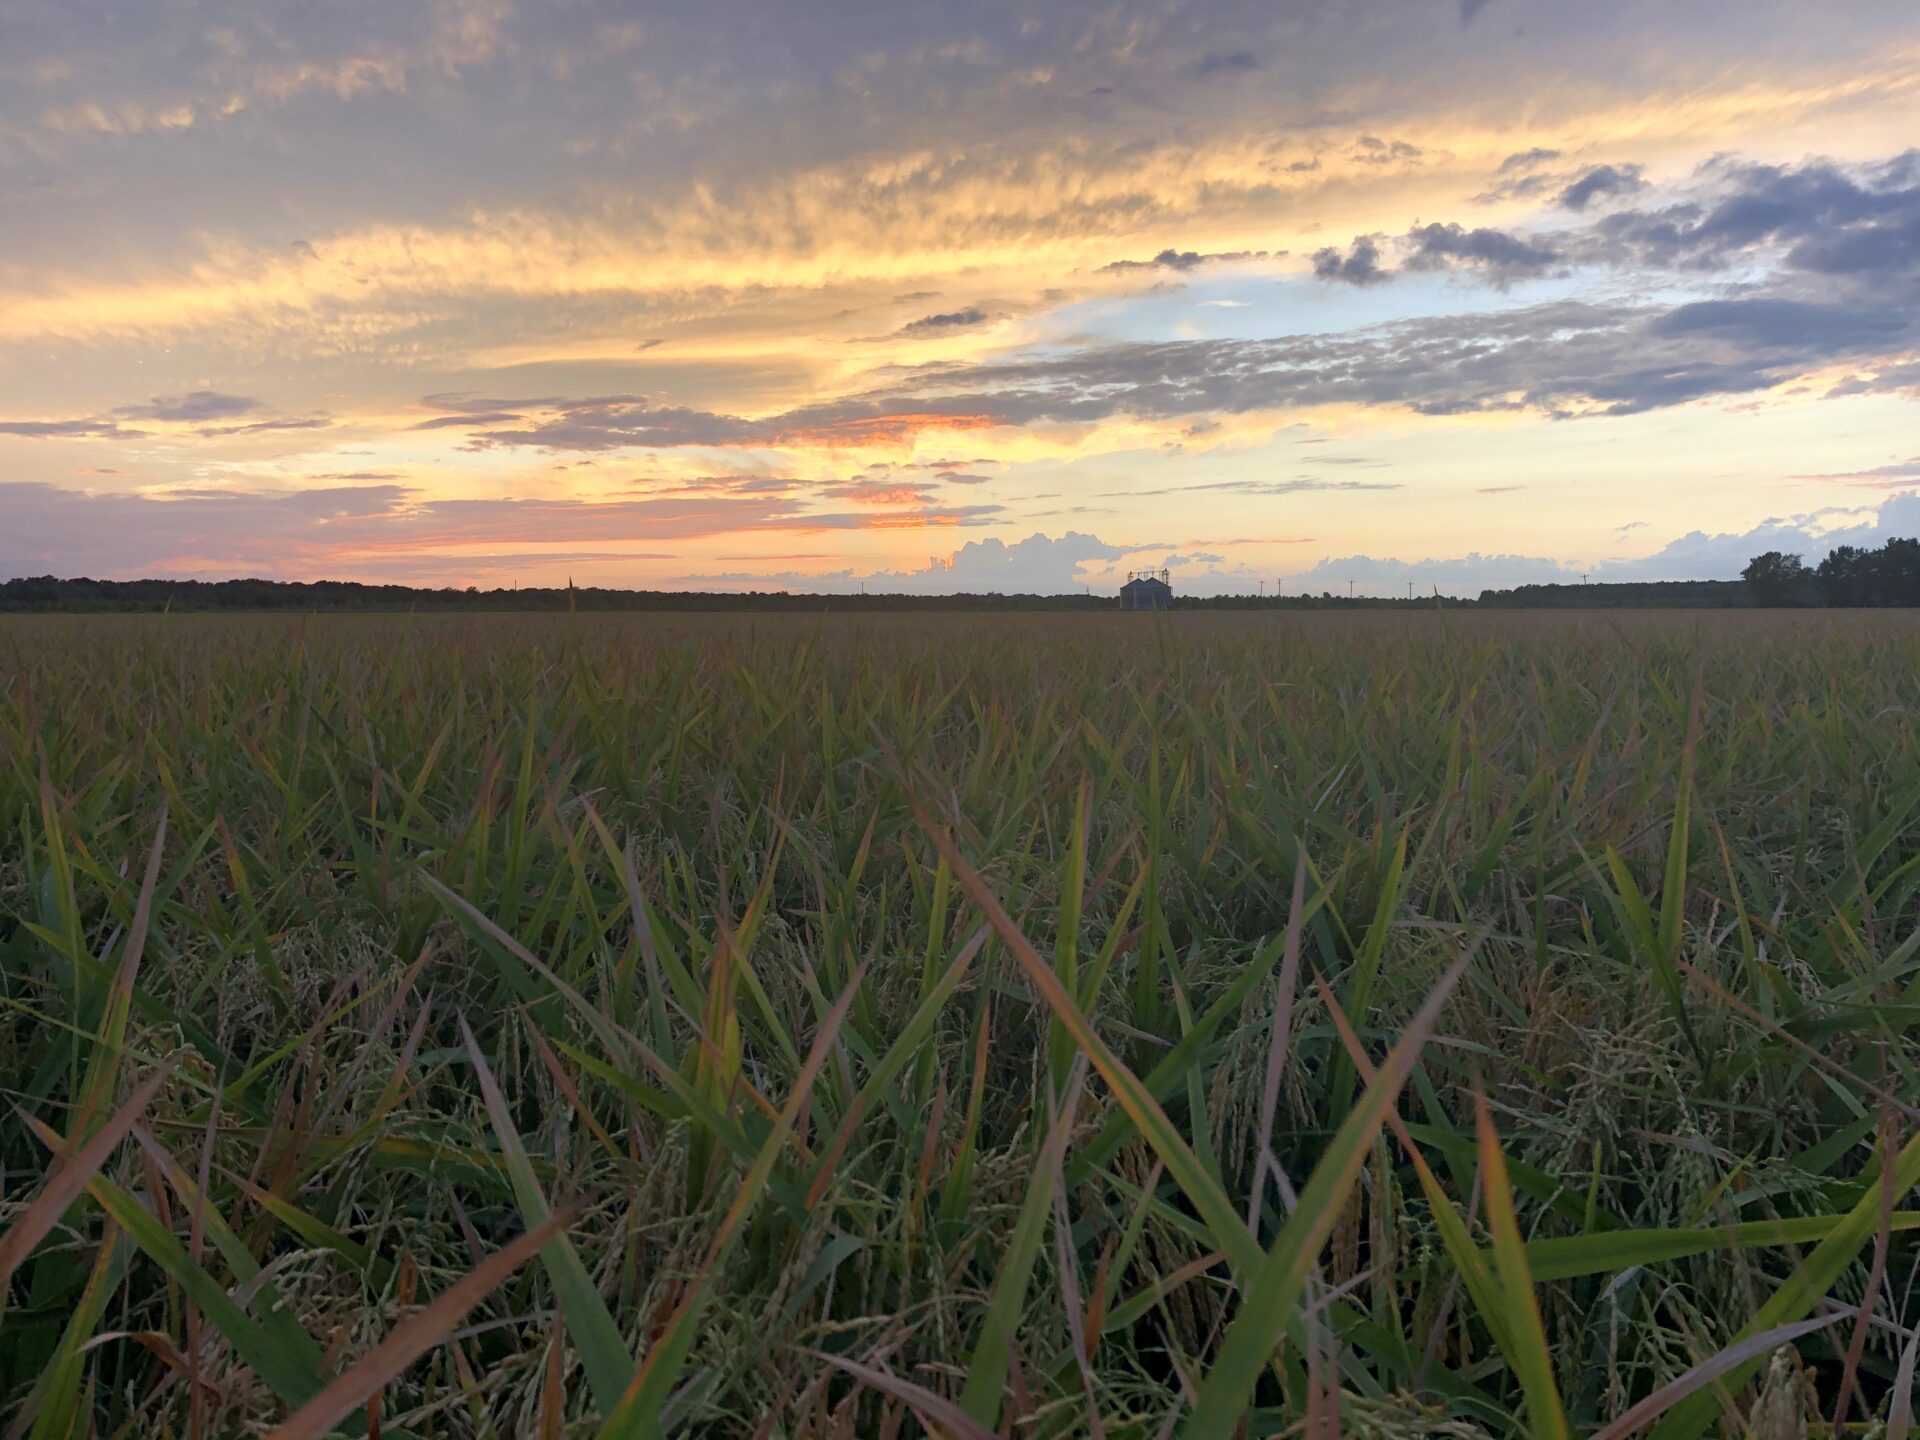 The sun sets upon a large rice field.